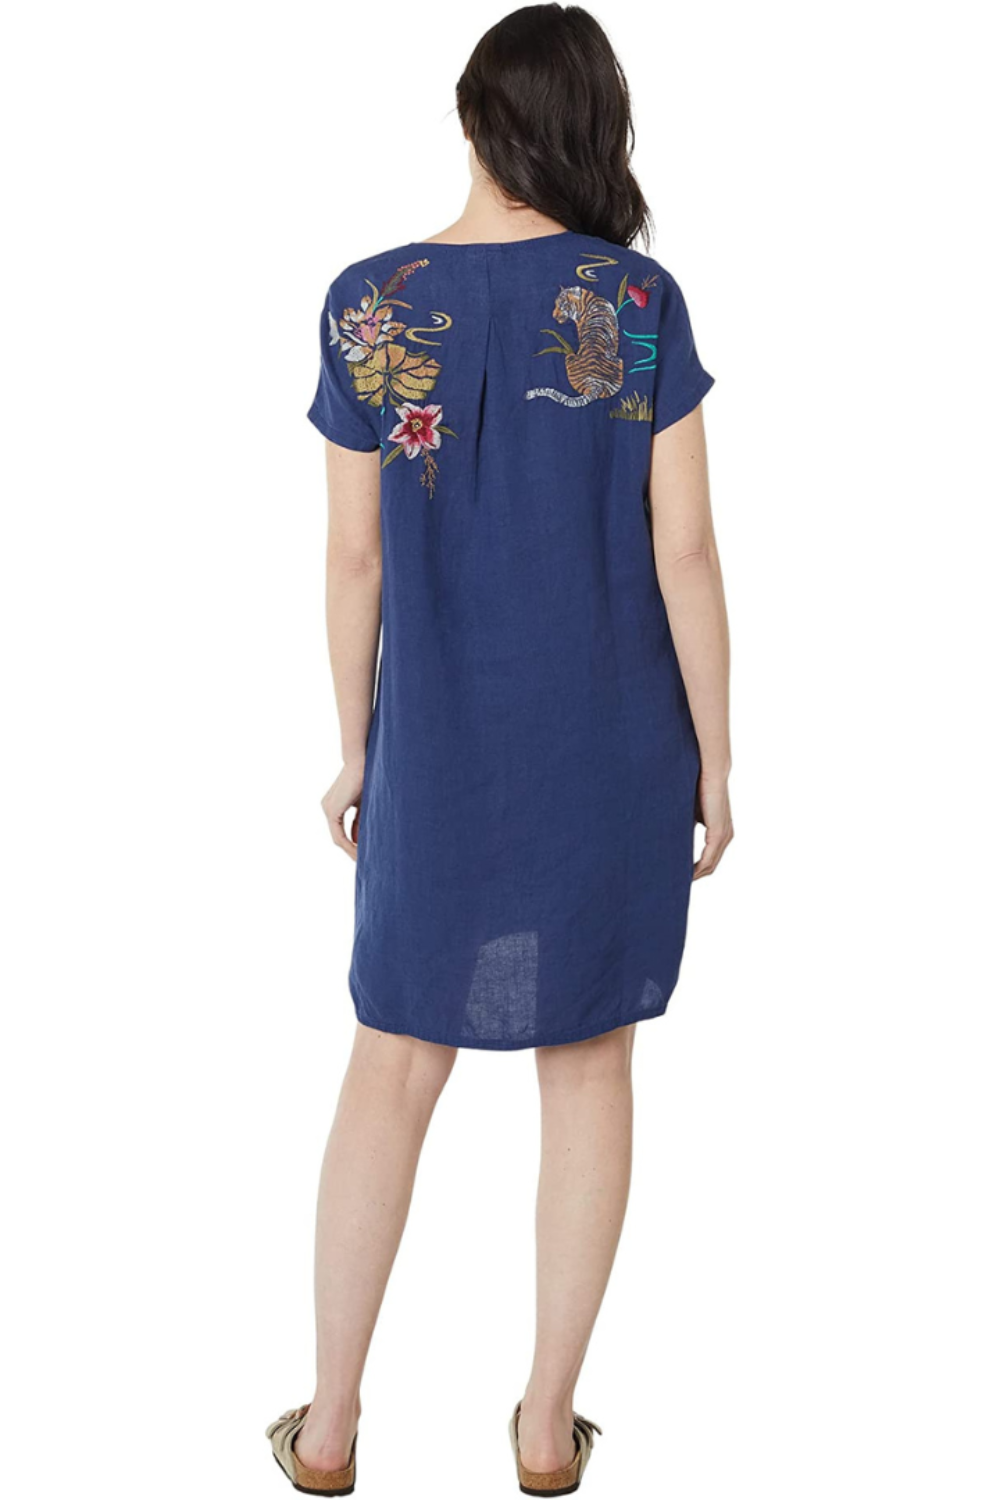 Johnny Was Maisie Easy Button Tunic Dress - Navy